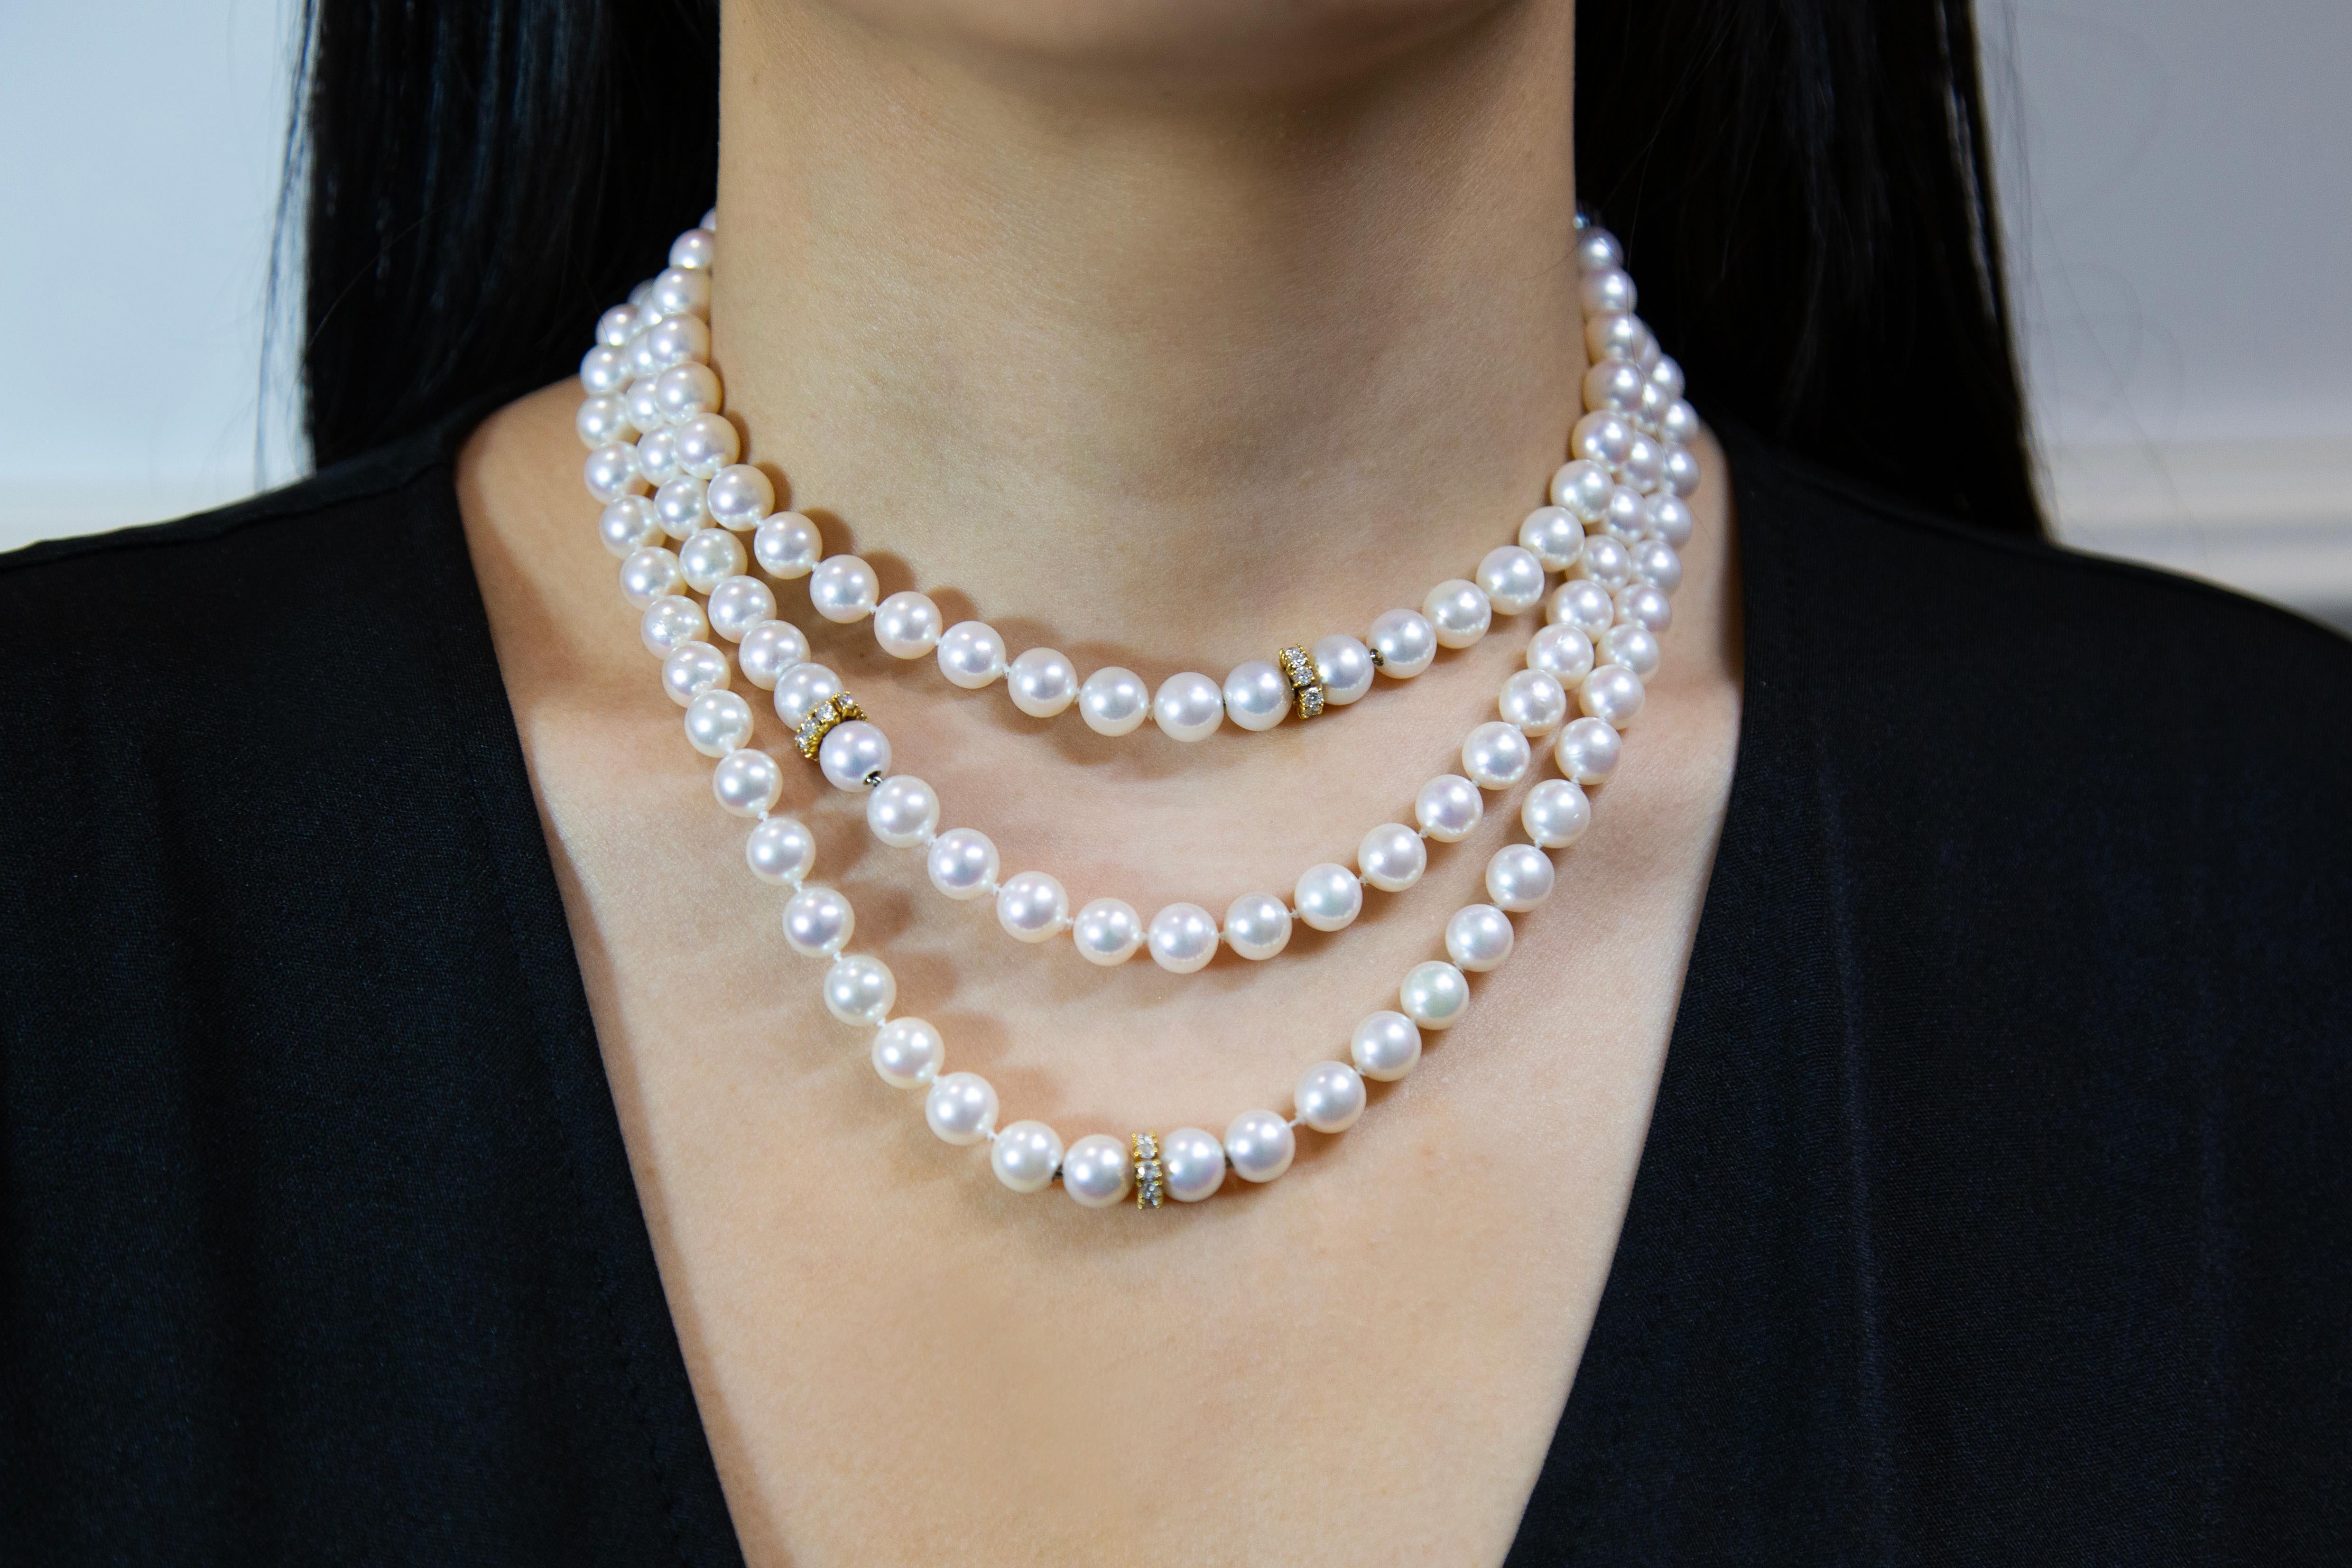 Contemporary Roman Malakov 1 Carats Total Diamond & Pearl Collapsible Multi-Strand Necklace For Sale